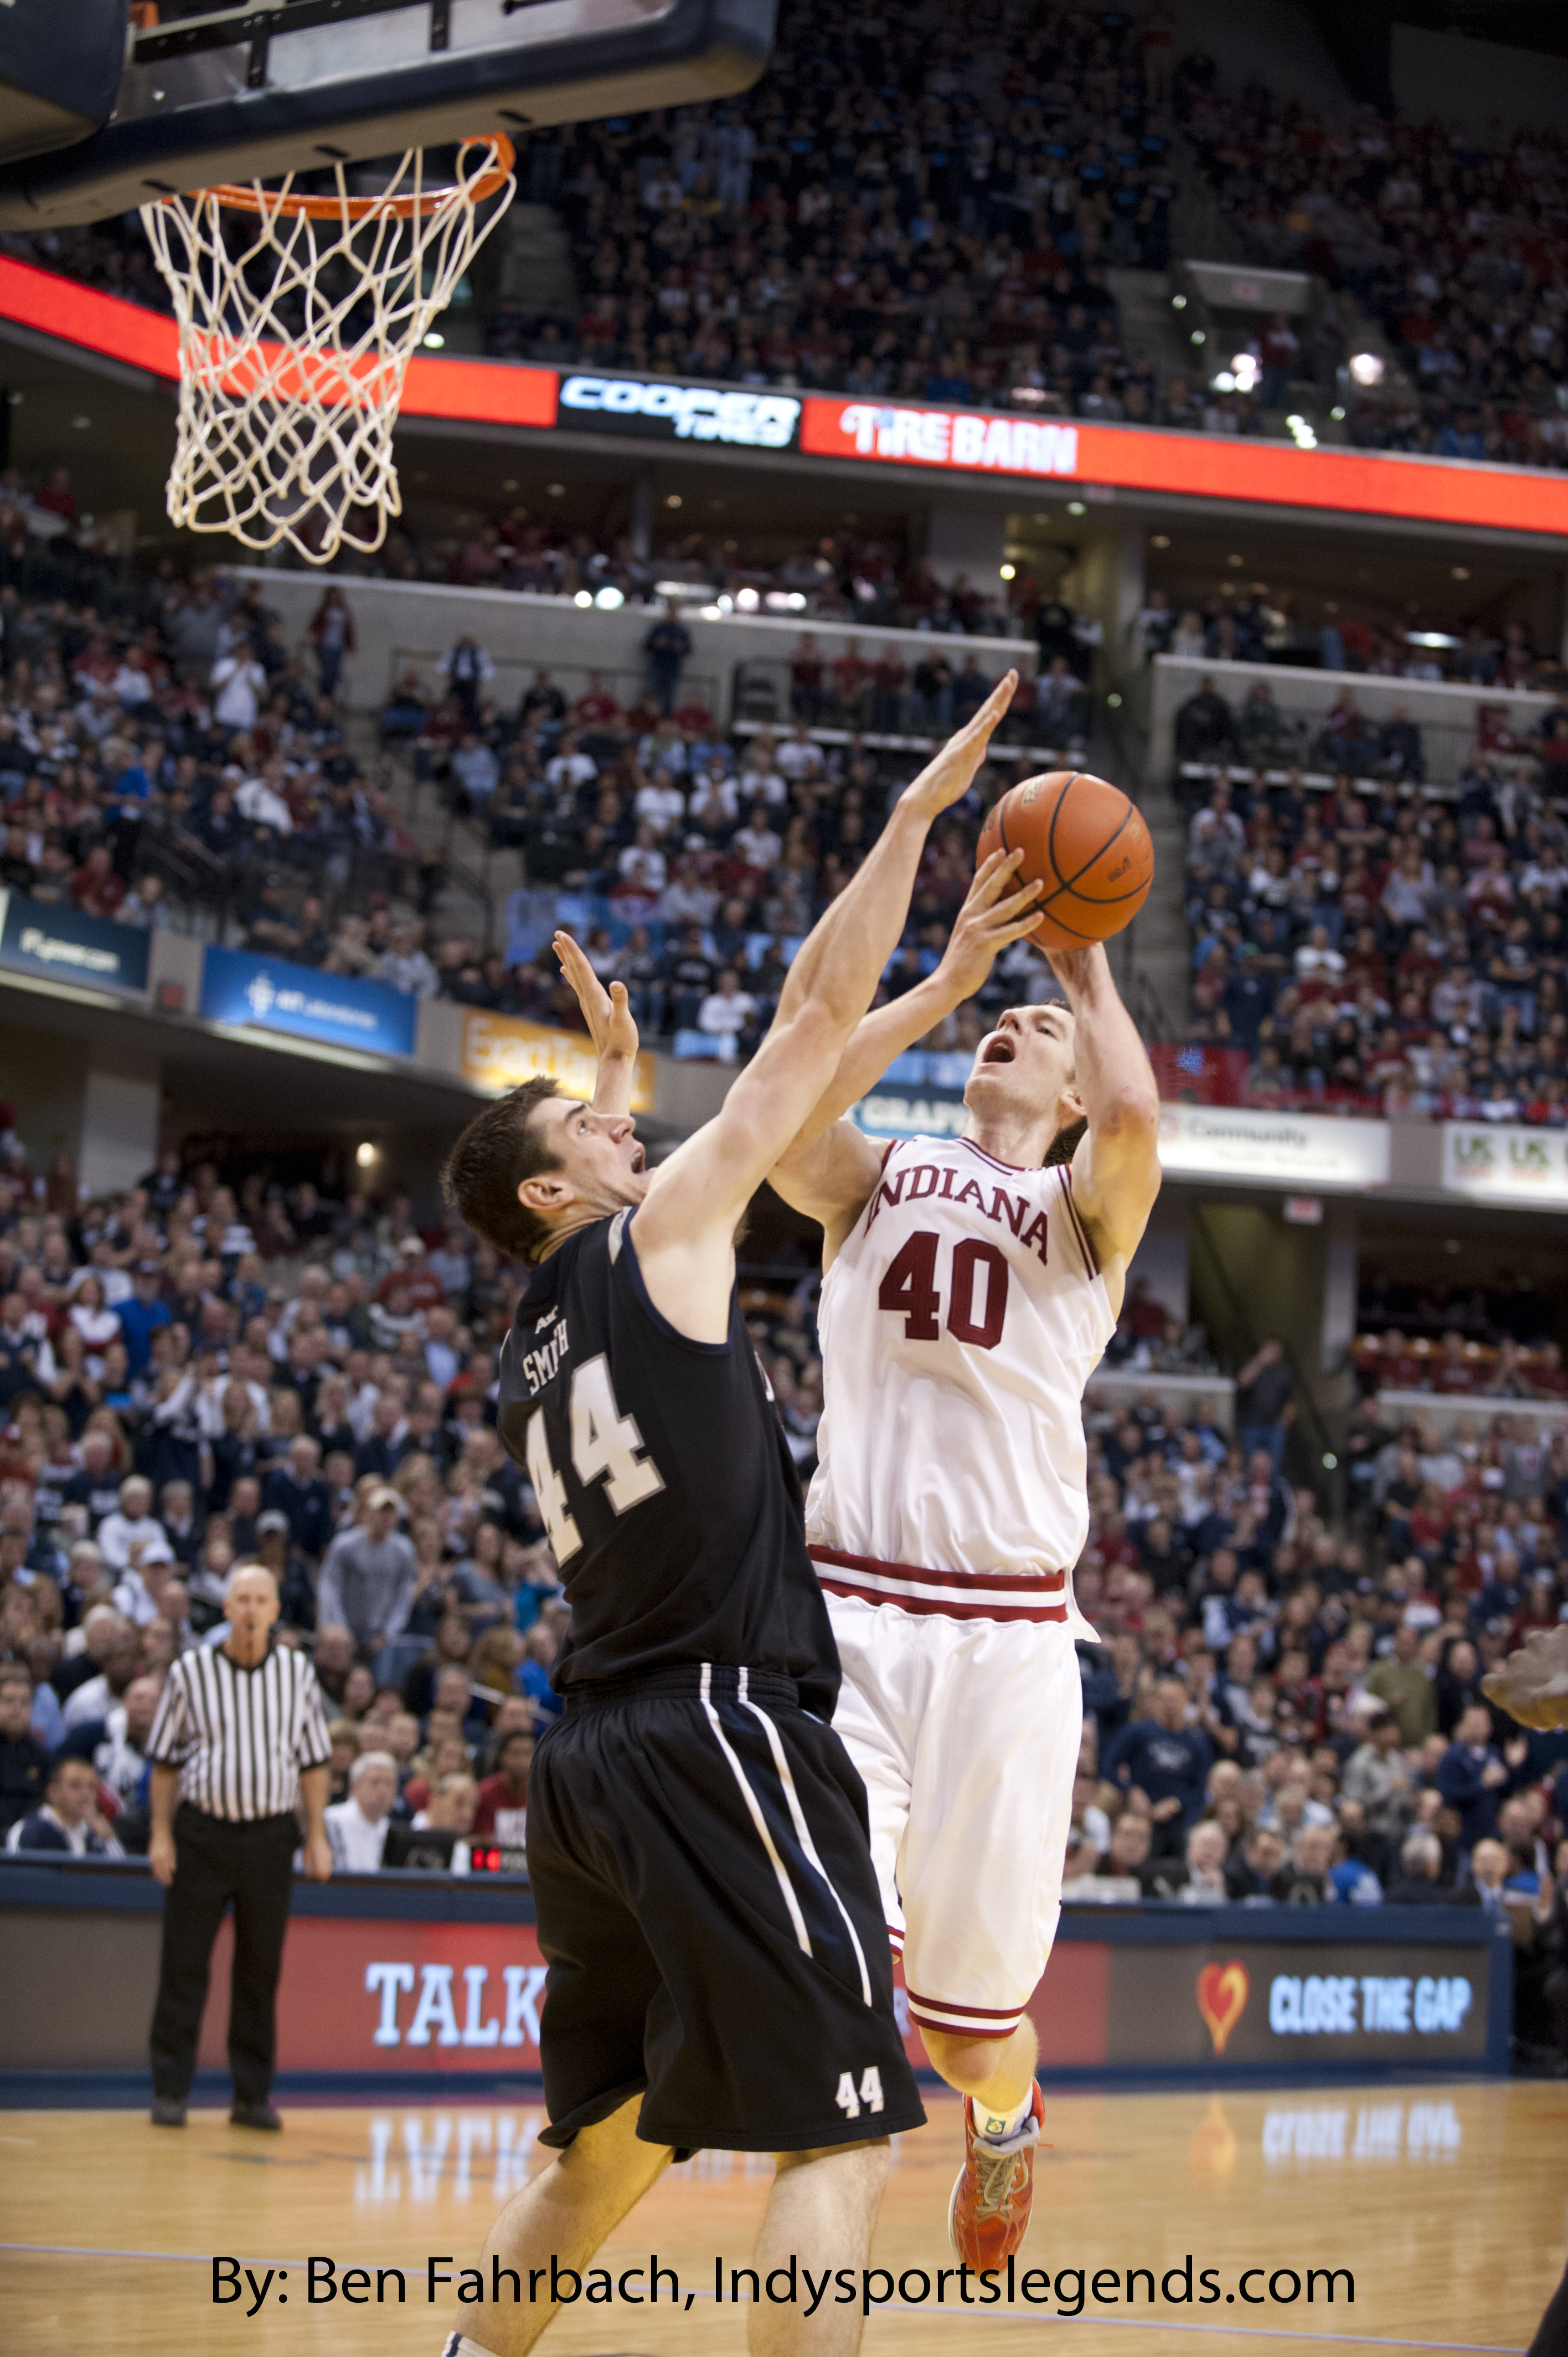 Indiana Basketball: Cody Zeller continues great play as other